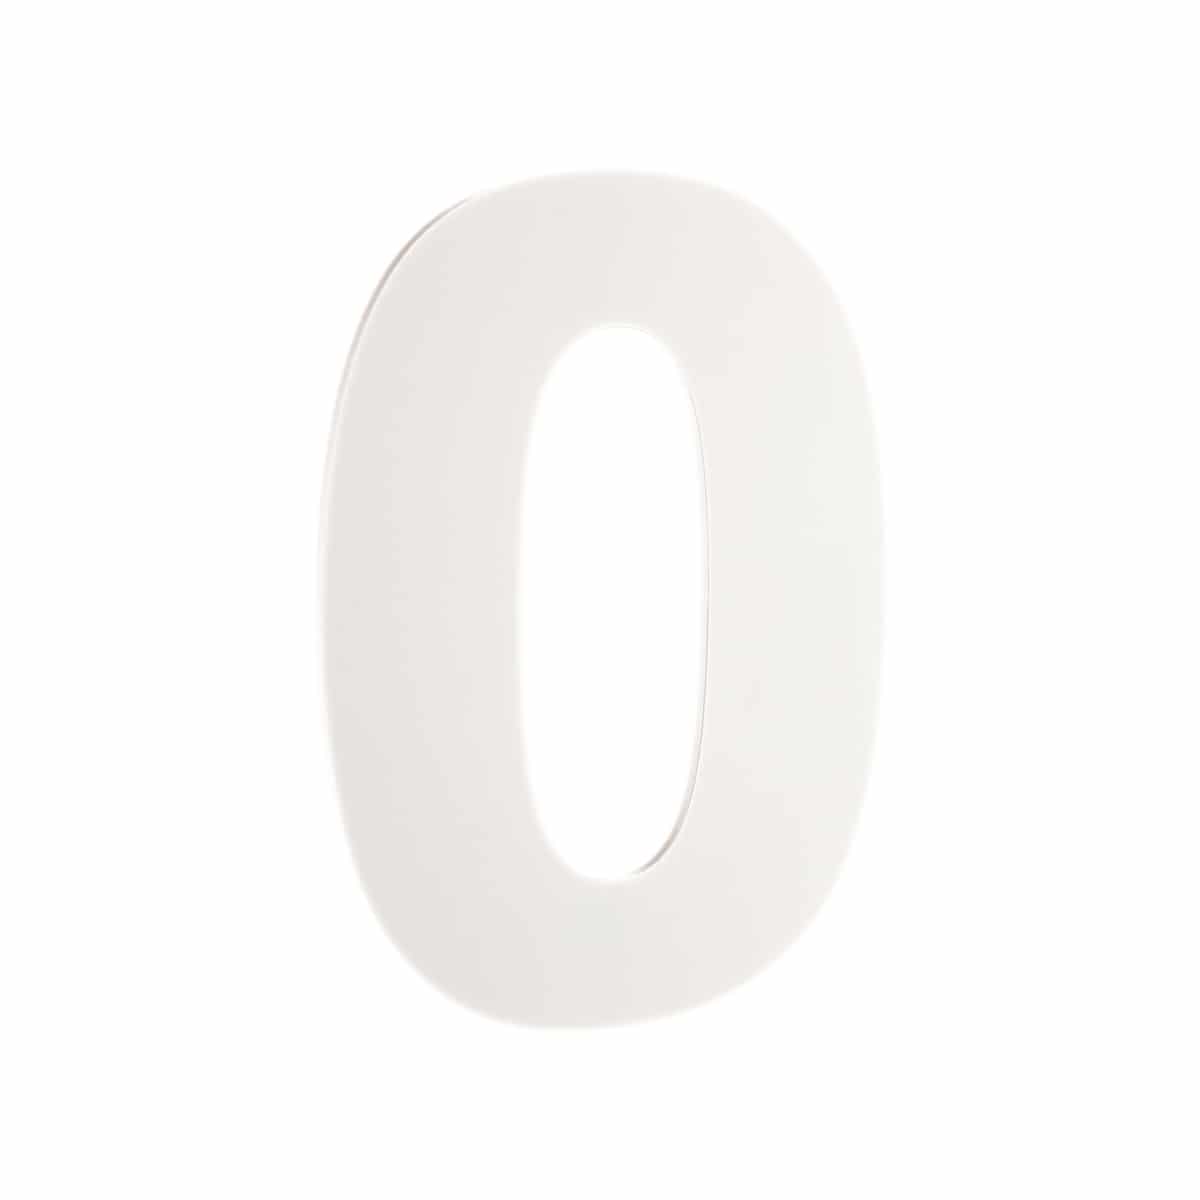 NUMBER 0 WHITE PERSPEX 40MM